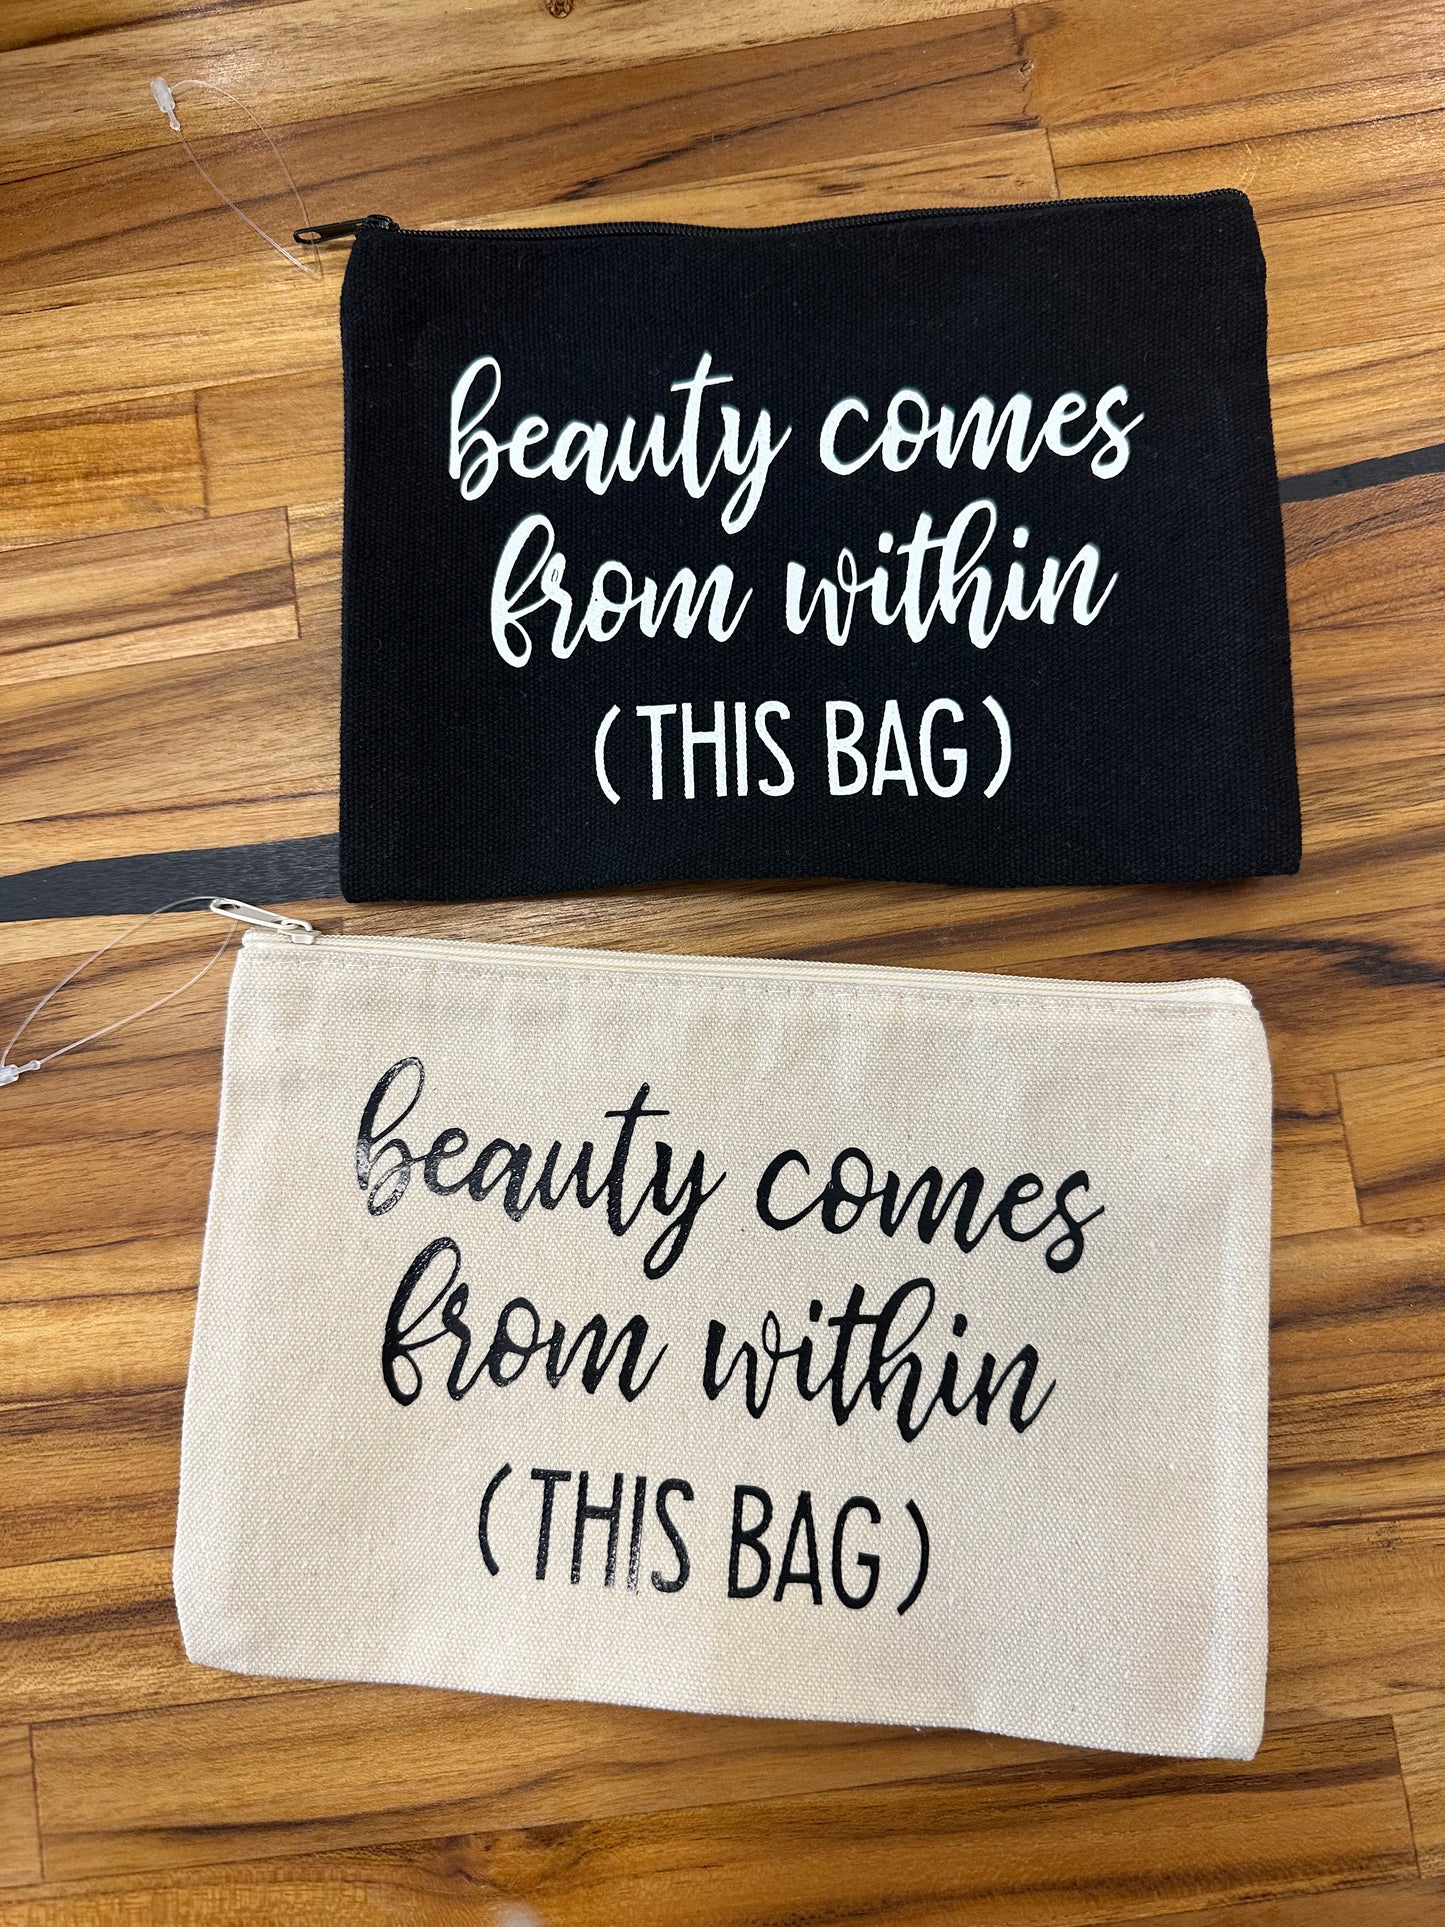 Beauty Comes from within (this bag) make up bag